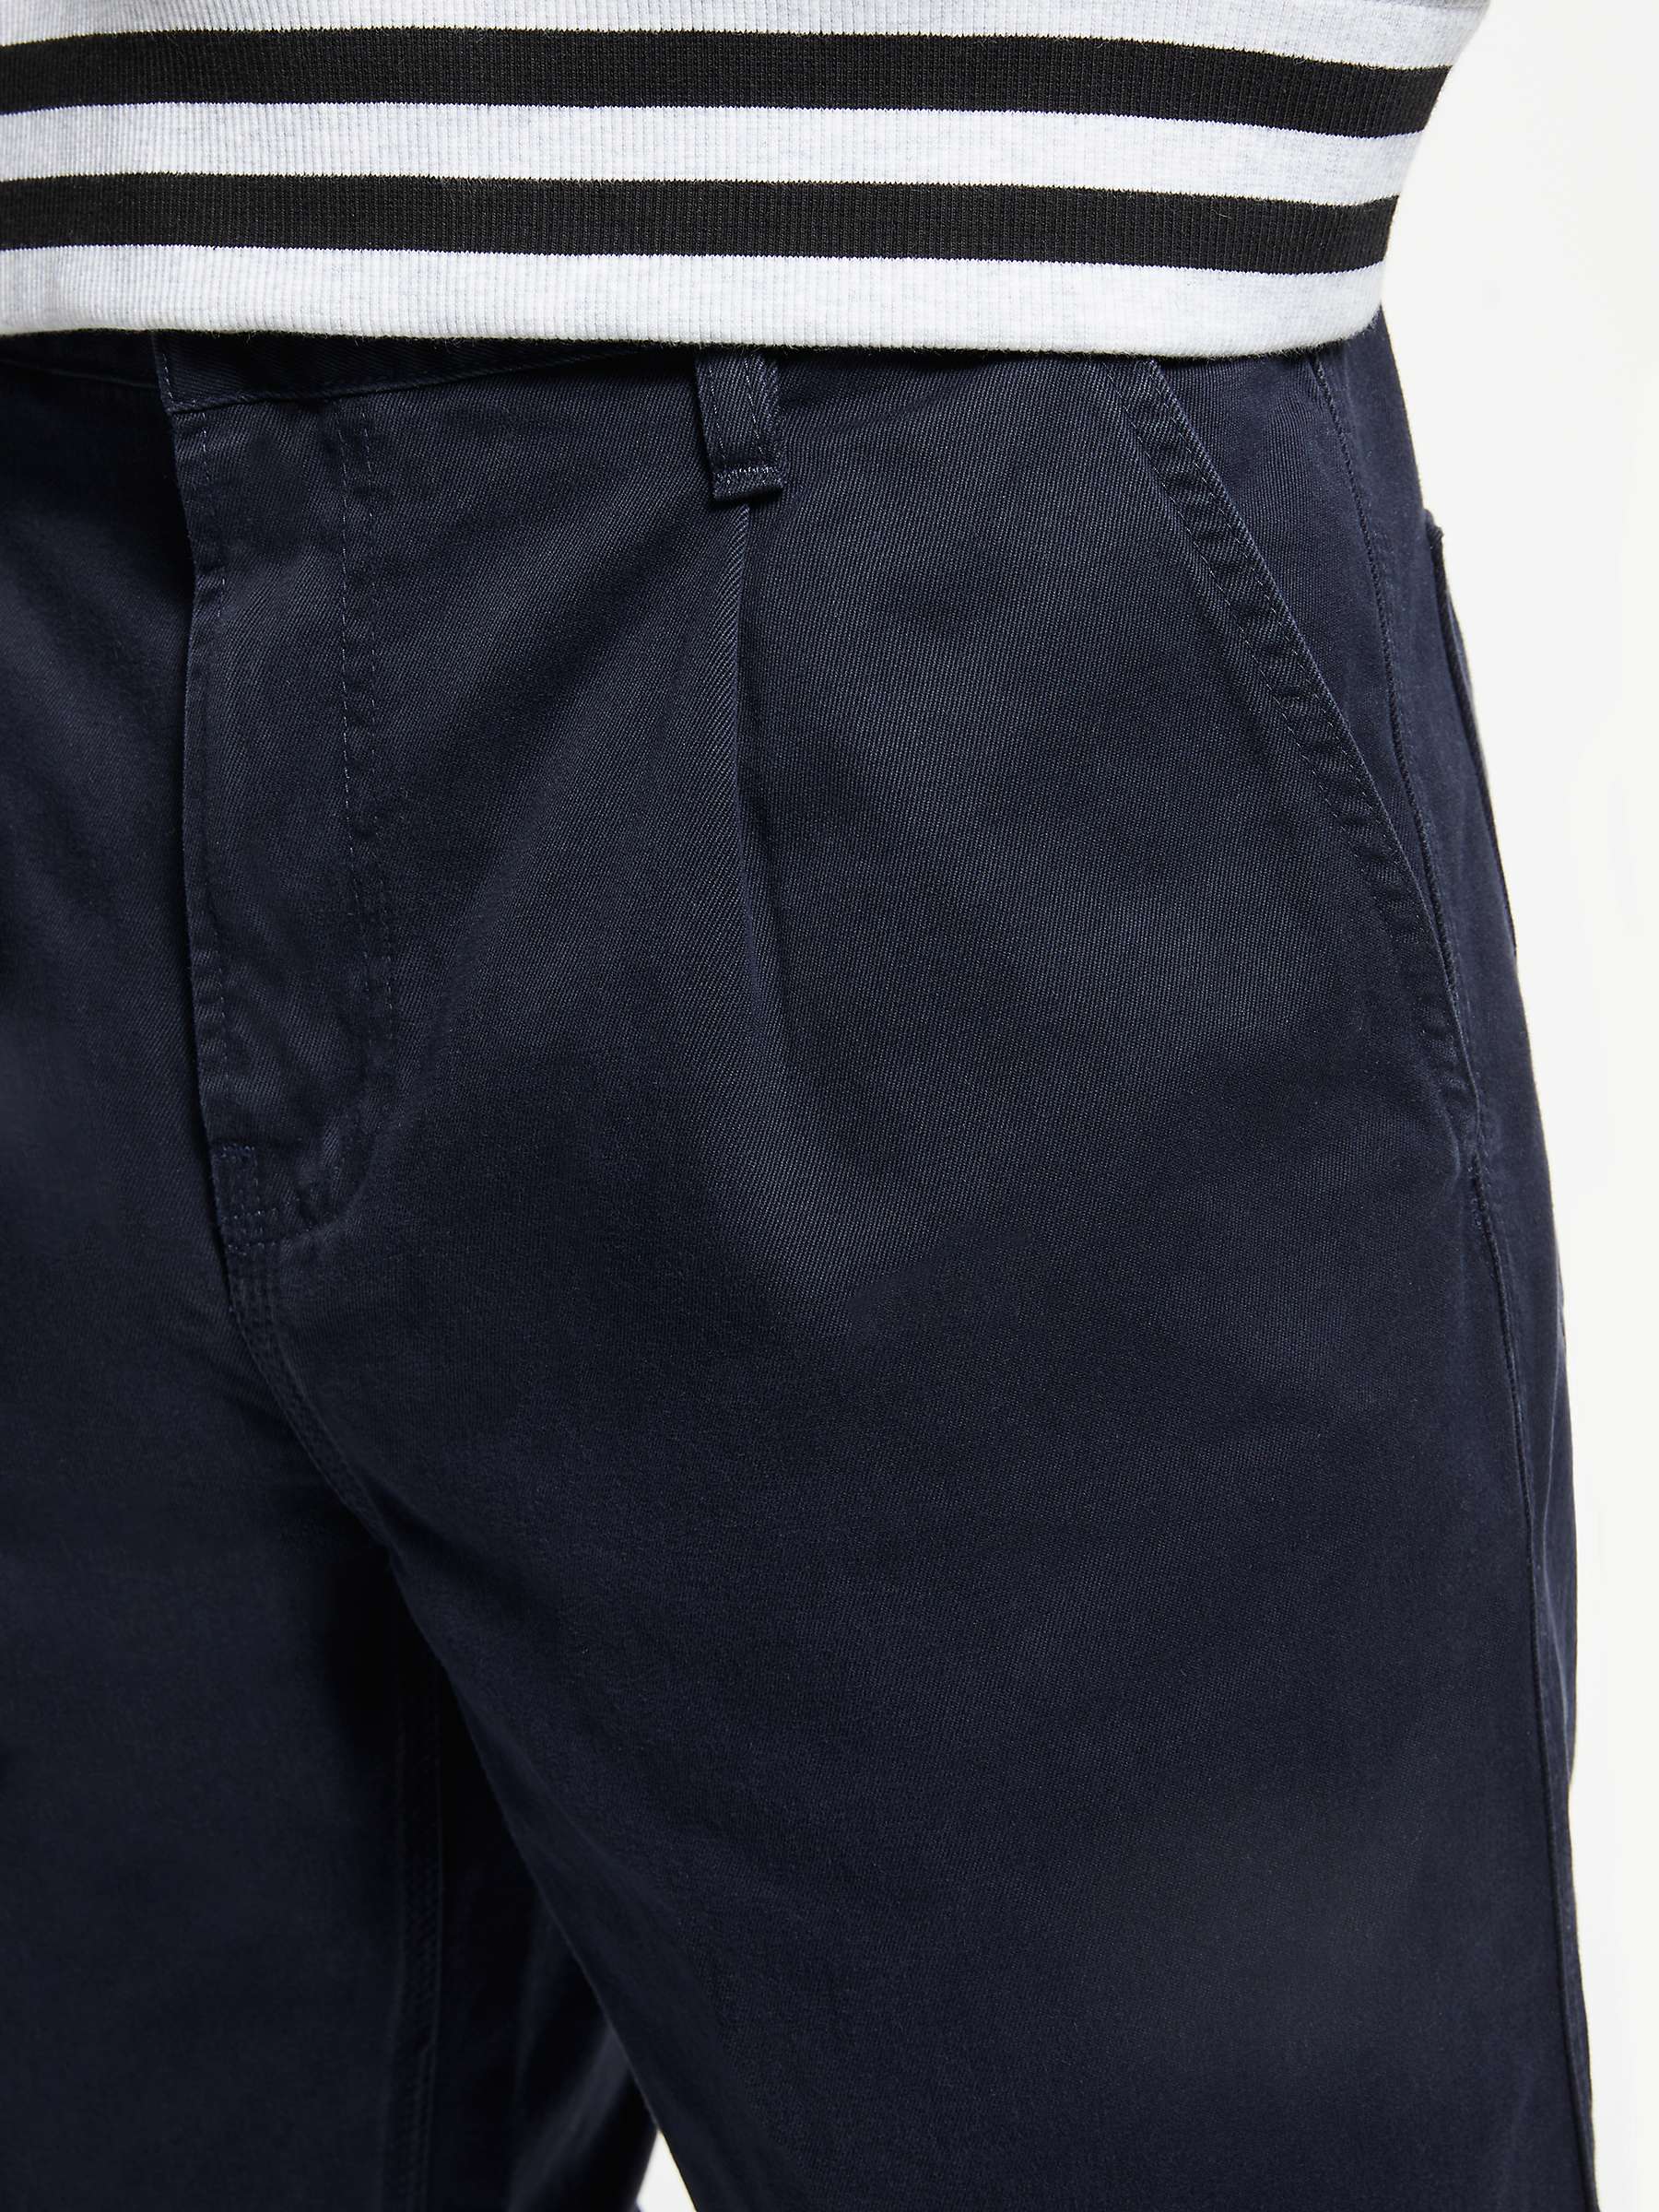 Carhartt WIP Abbot Tapered Trousers, Navy at John Lewis & Partners